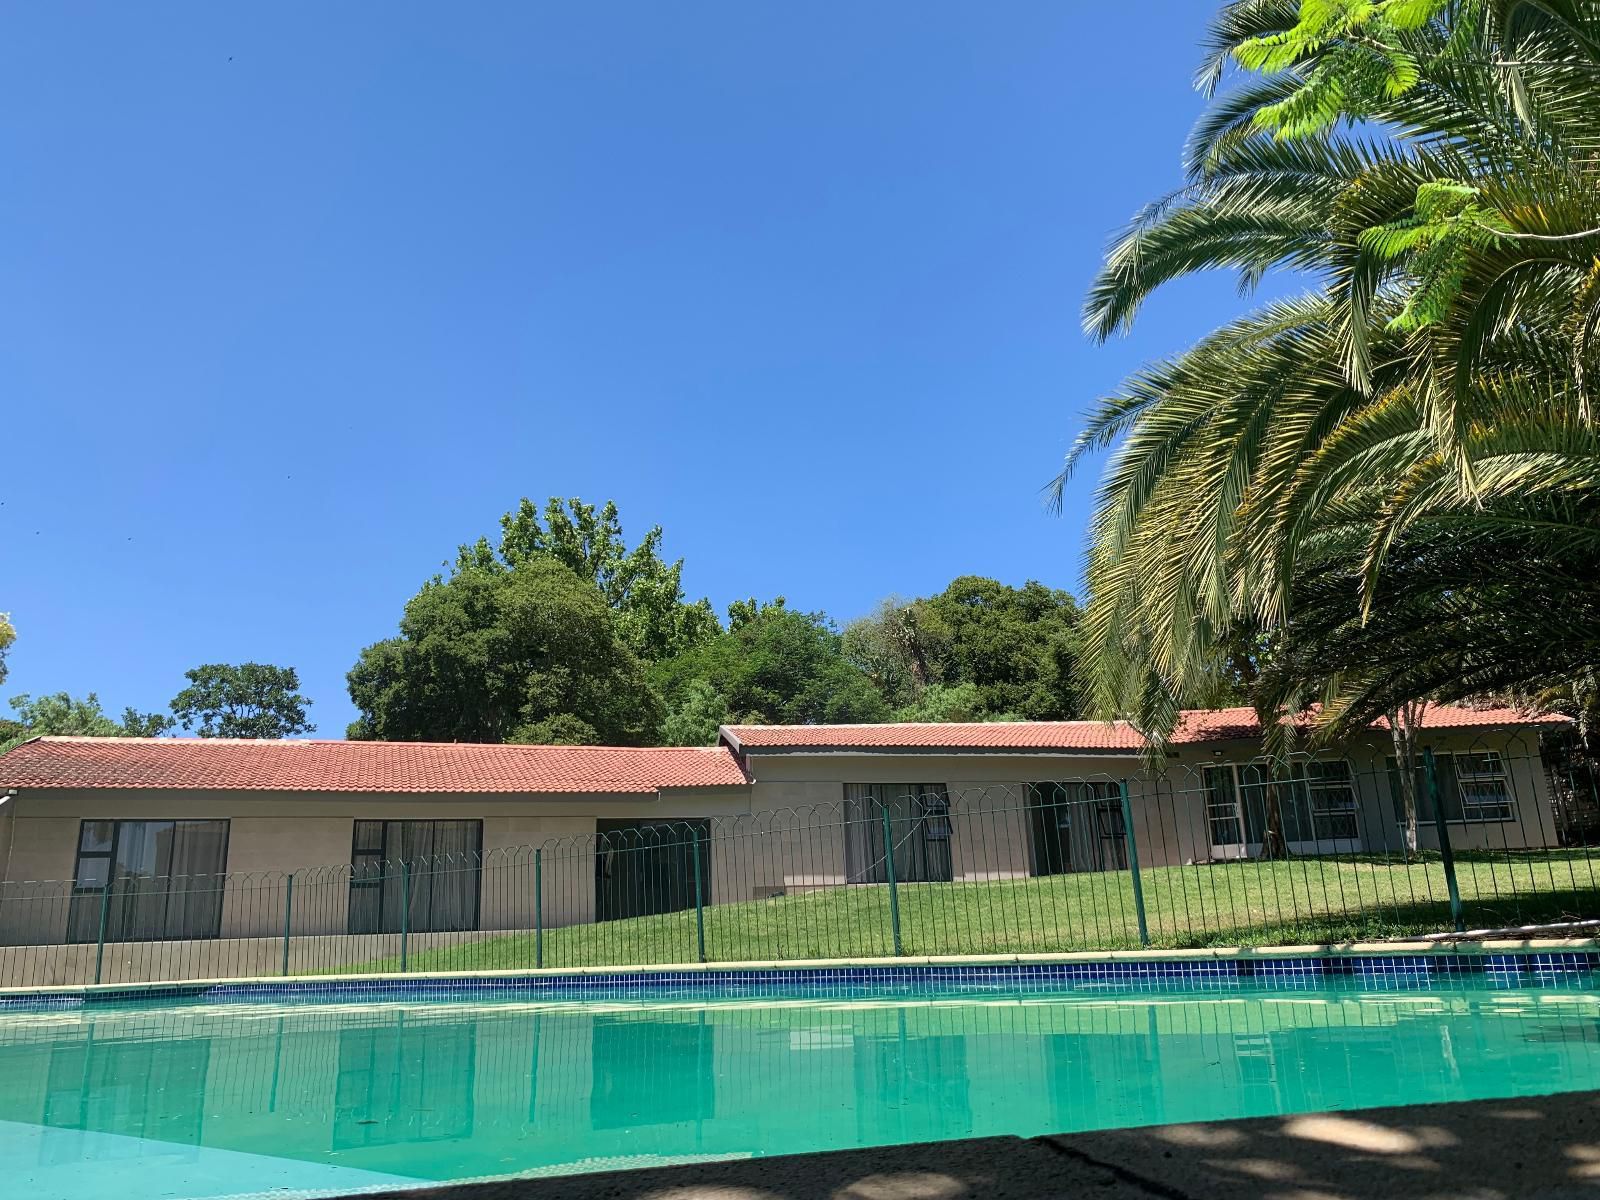 Rivonia Guest House Edenburg Johannesburg Gauteng South Africa House, Building, Architecture, Palm Tree, Plant, Nature, Wood, Swimming Pool